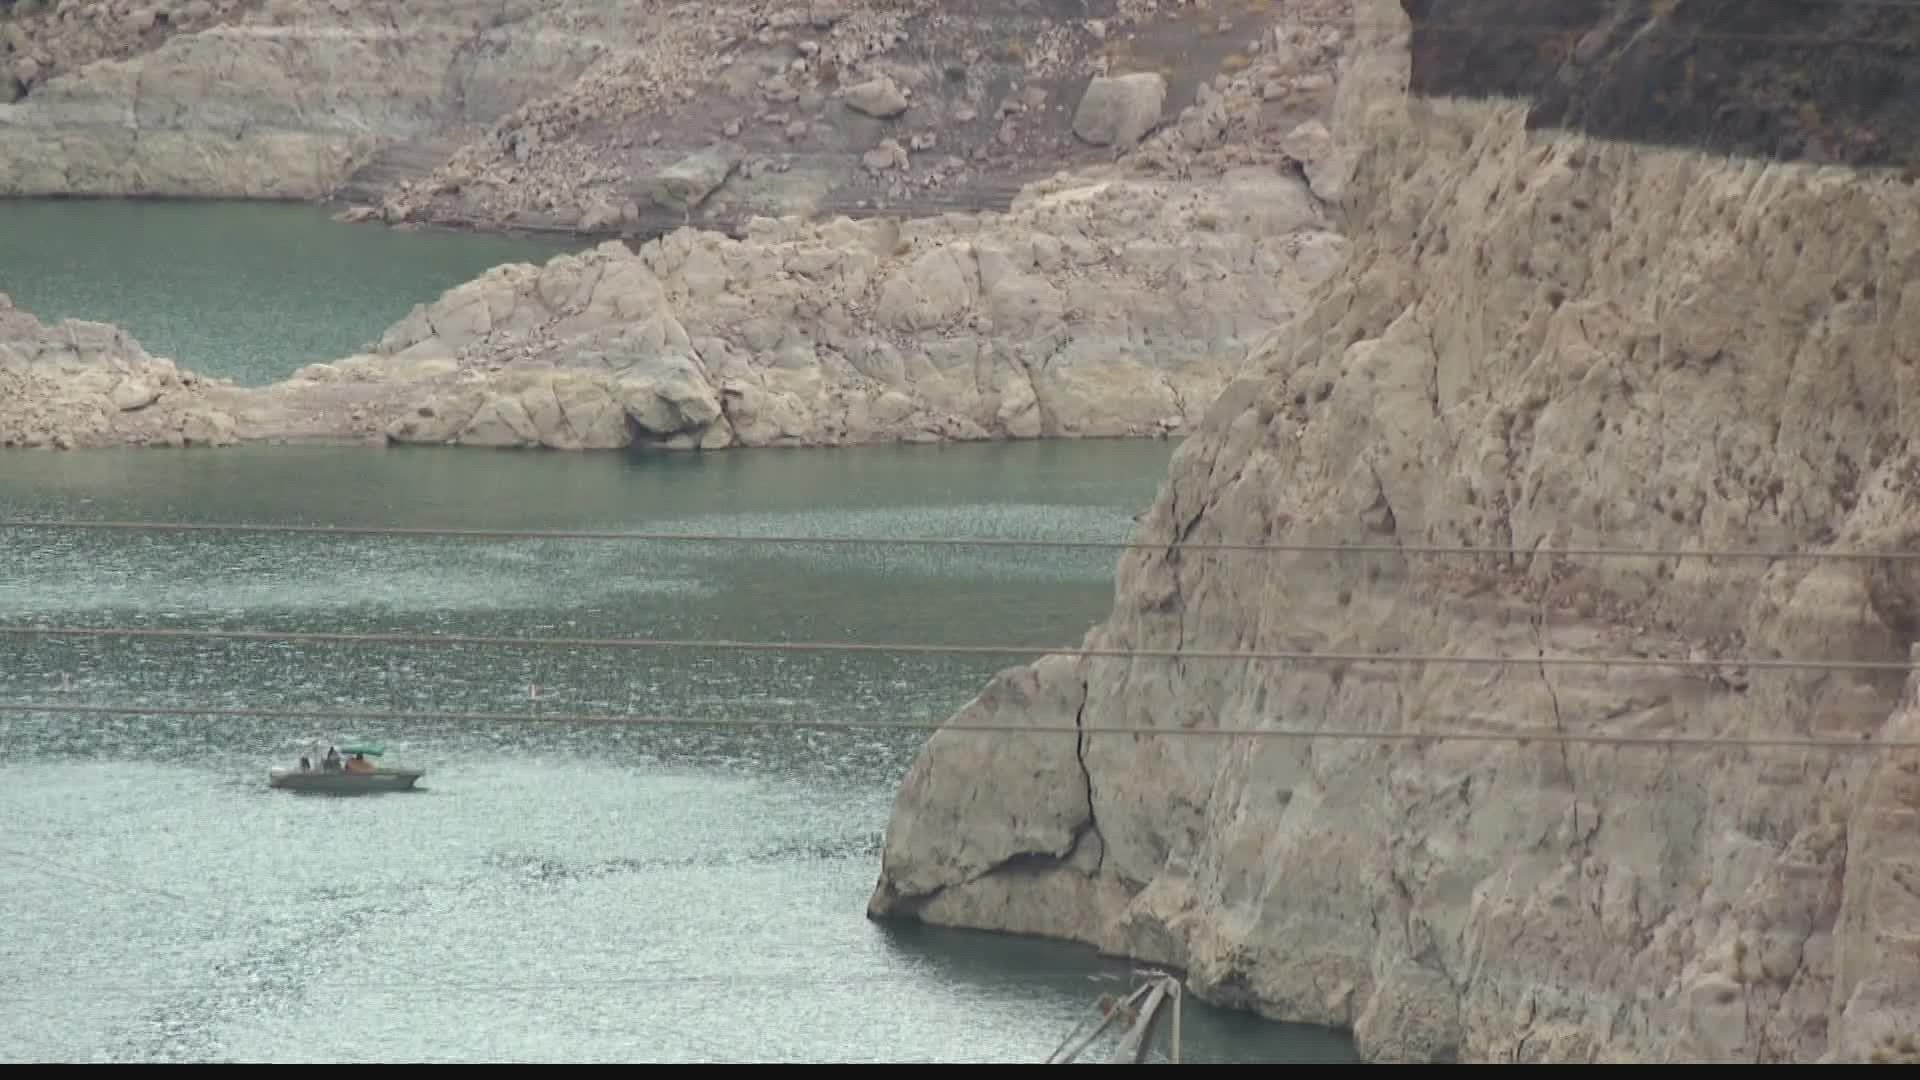 Officials with Central Arizona Project and the Dept. of Water Resources warn the state needs to do more to conserve water to help stave off even more restrictions.